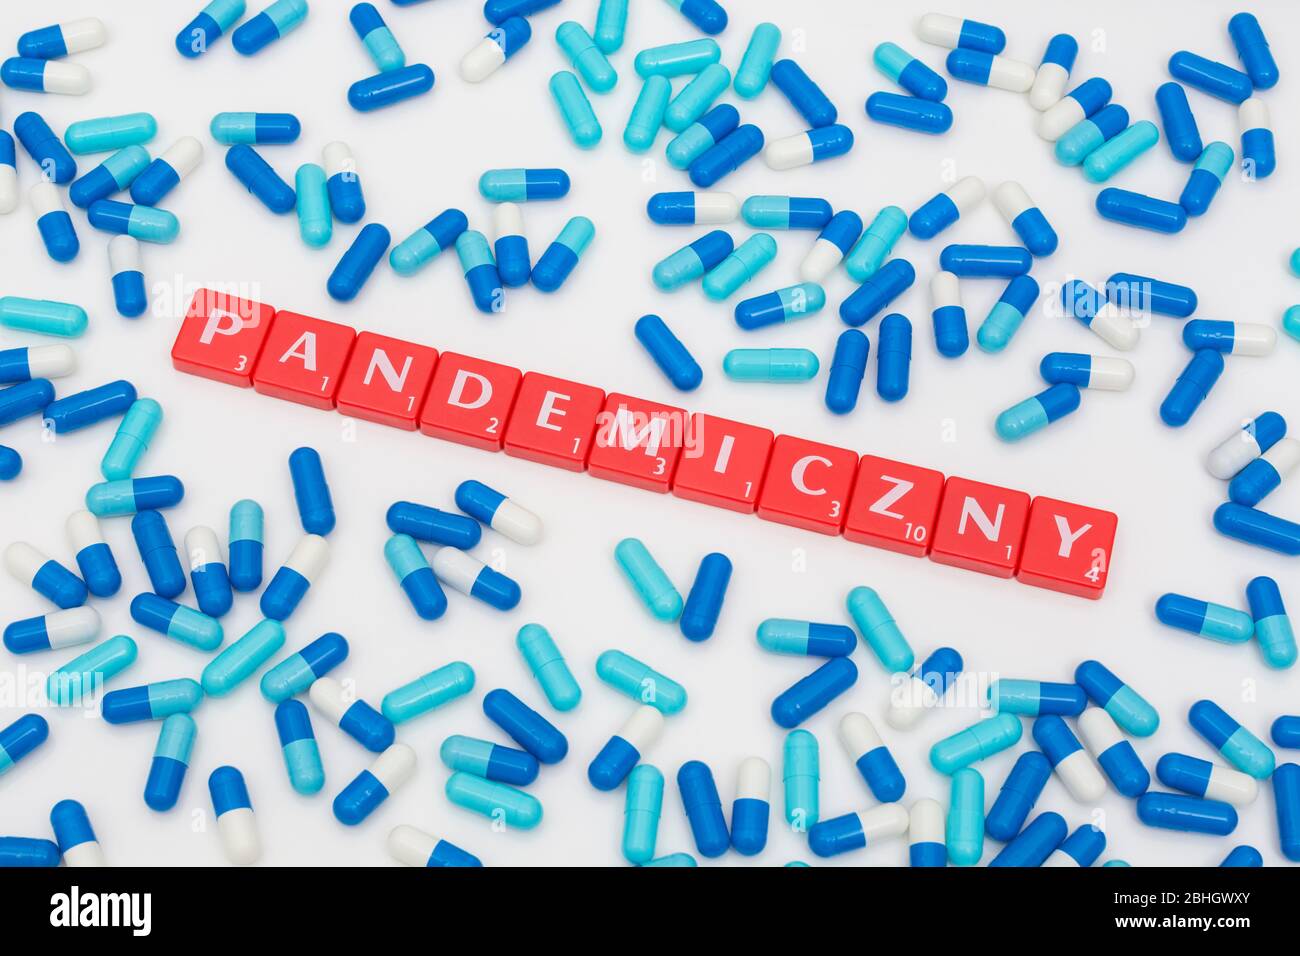 Scattered blue pills caplets and red letter tiles: PANDEMICZNY - Polish adjectival form of word Pandemic. Coronavirus conceptual, Covid 19 metaphor Stock Photo